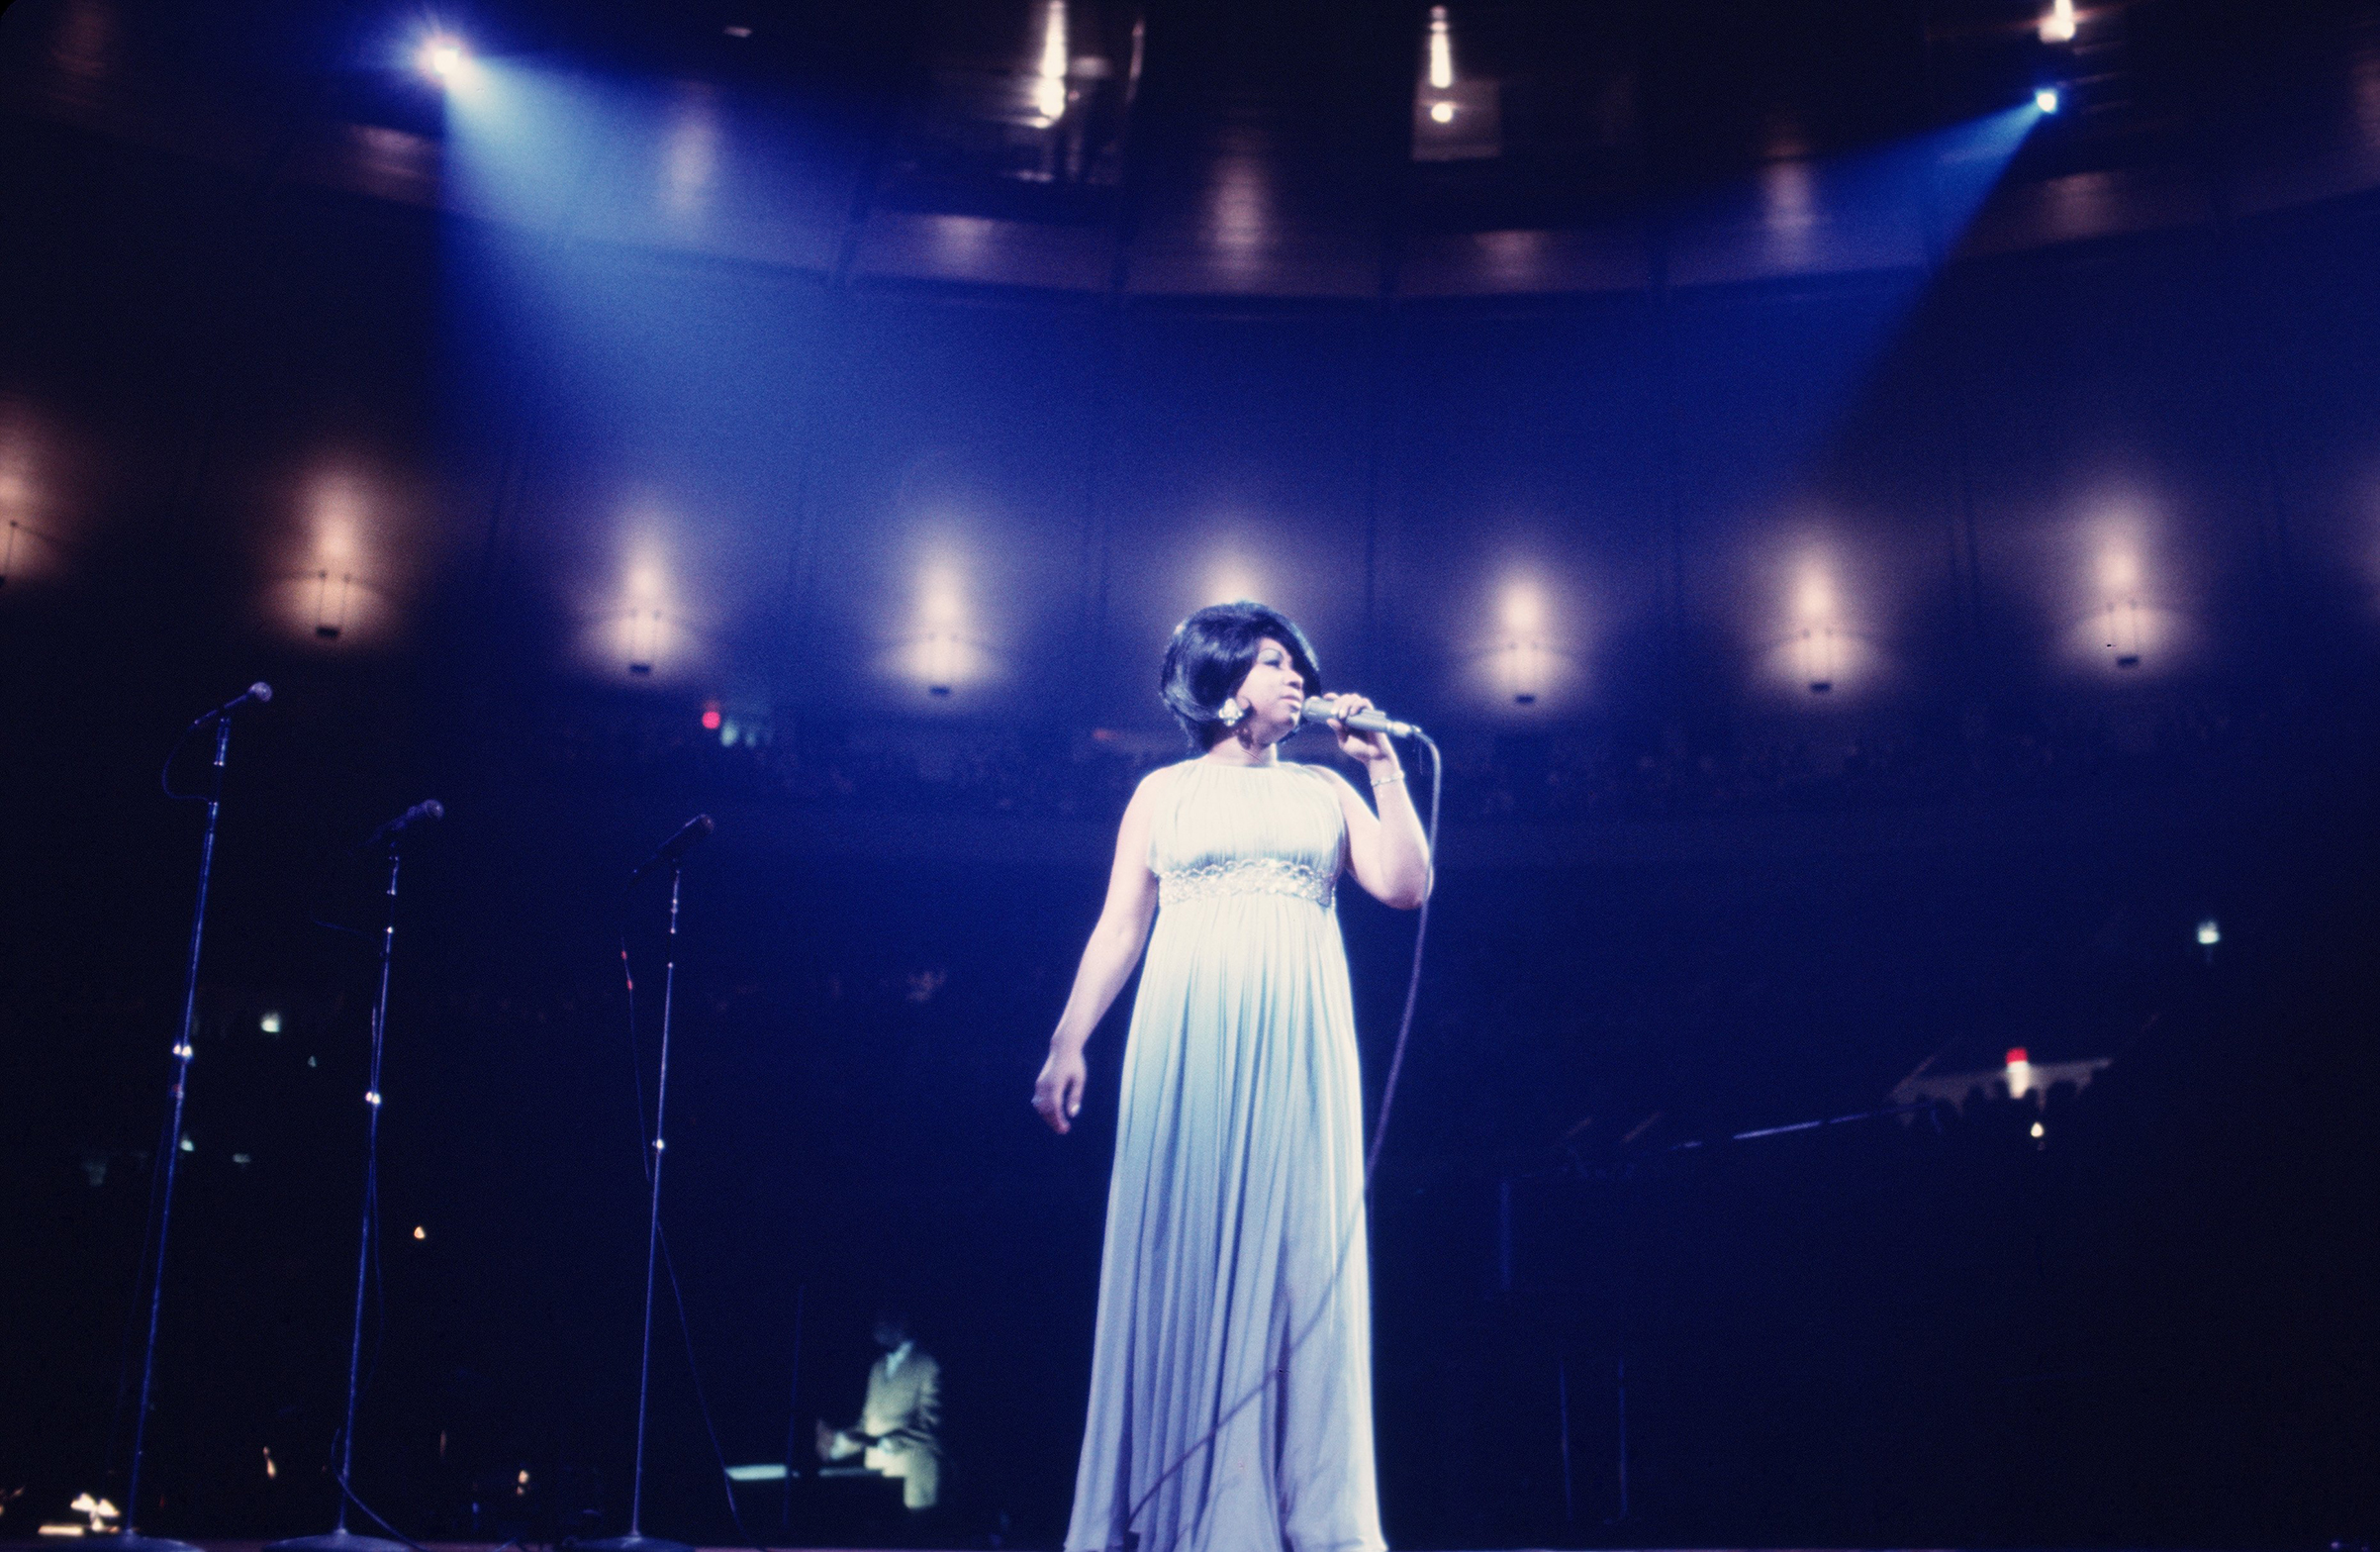 Singer Aretha Franklin performs during a concert at Madison Square Garden on June 28, 1968 in New York City, New York. (Photo by Walter Iooss Jr./Getty Images) (Walter Iooss Jr—Getty Images)